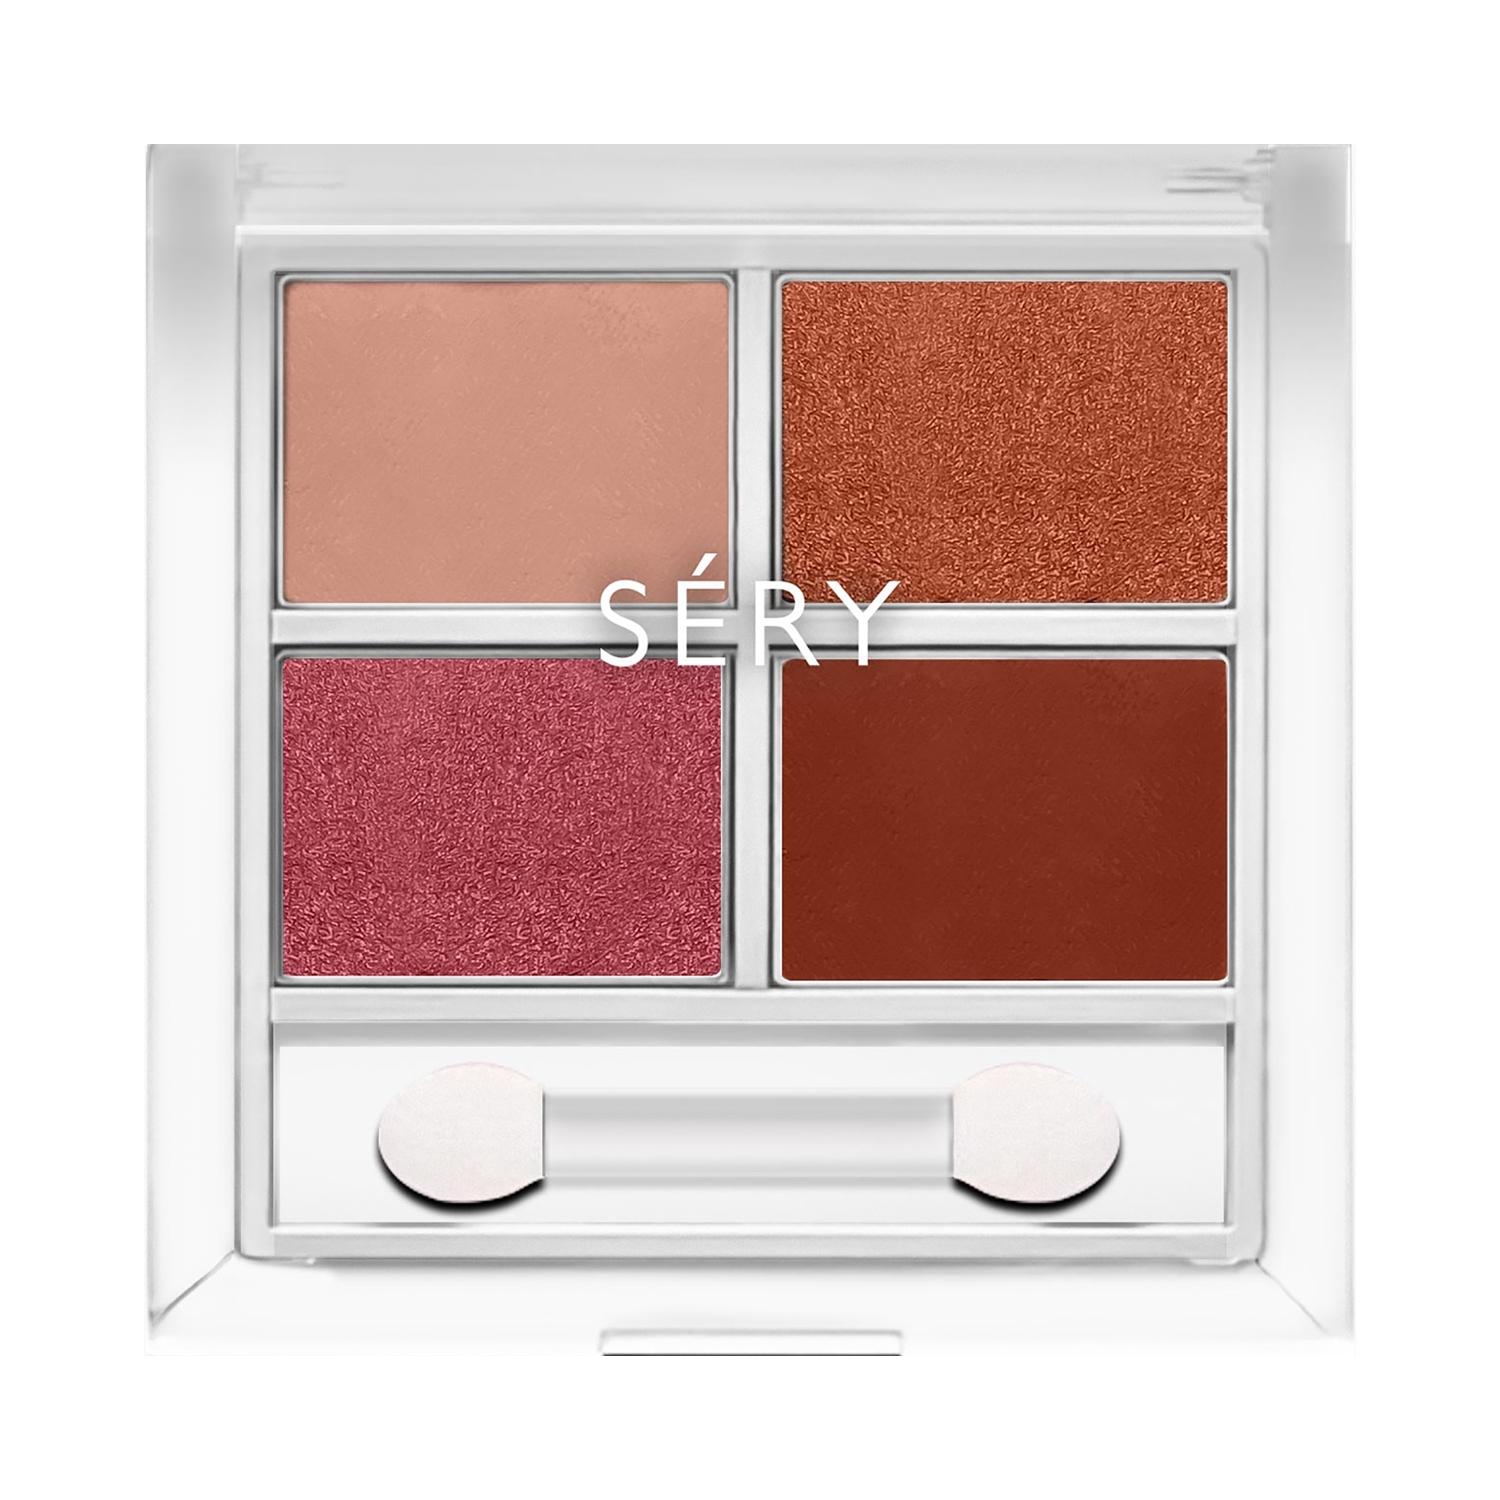 sery day to night eye shadow palette - dress me up (7.2g)